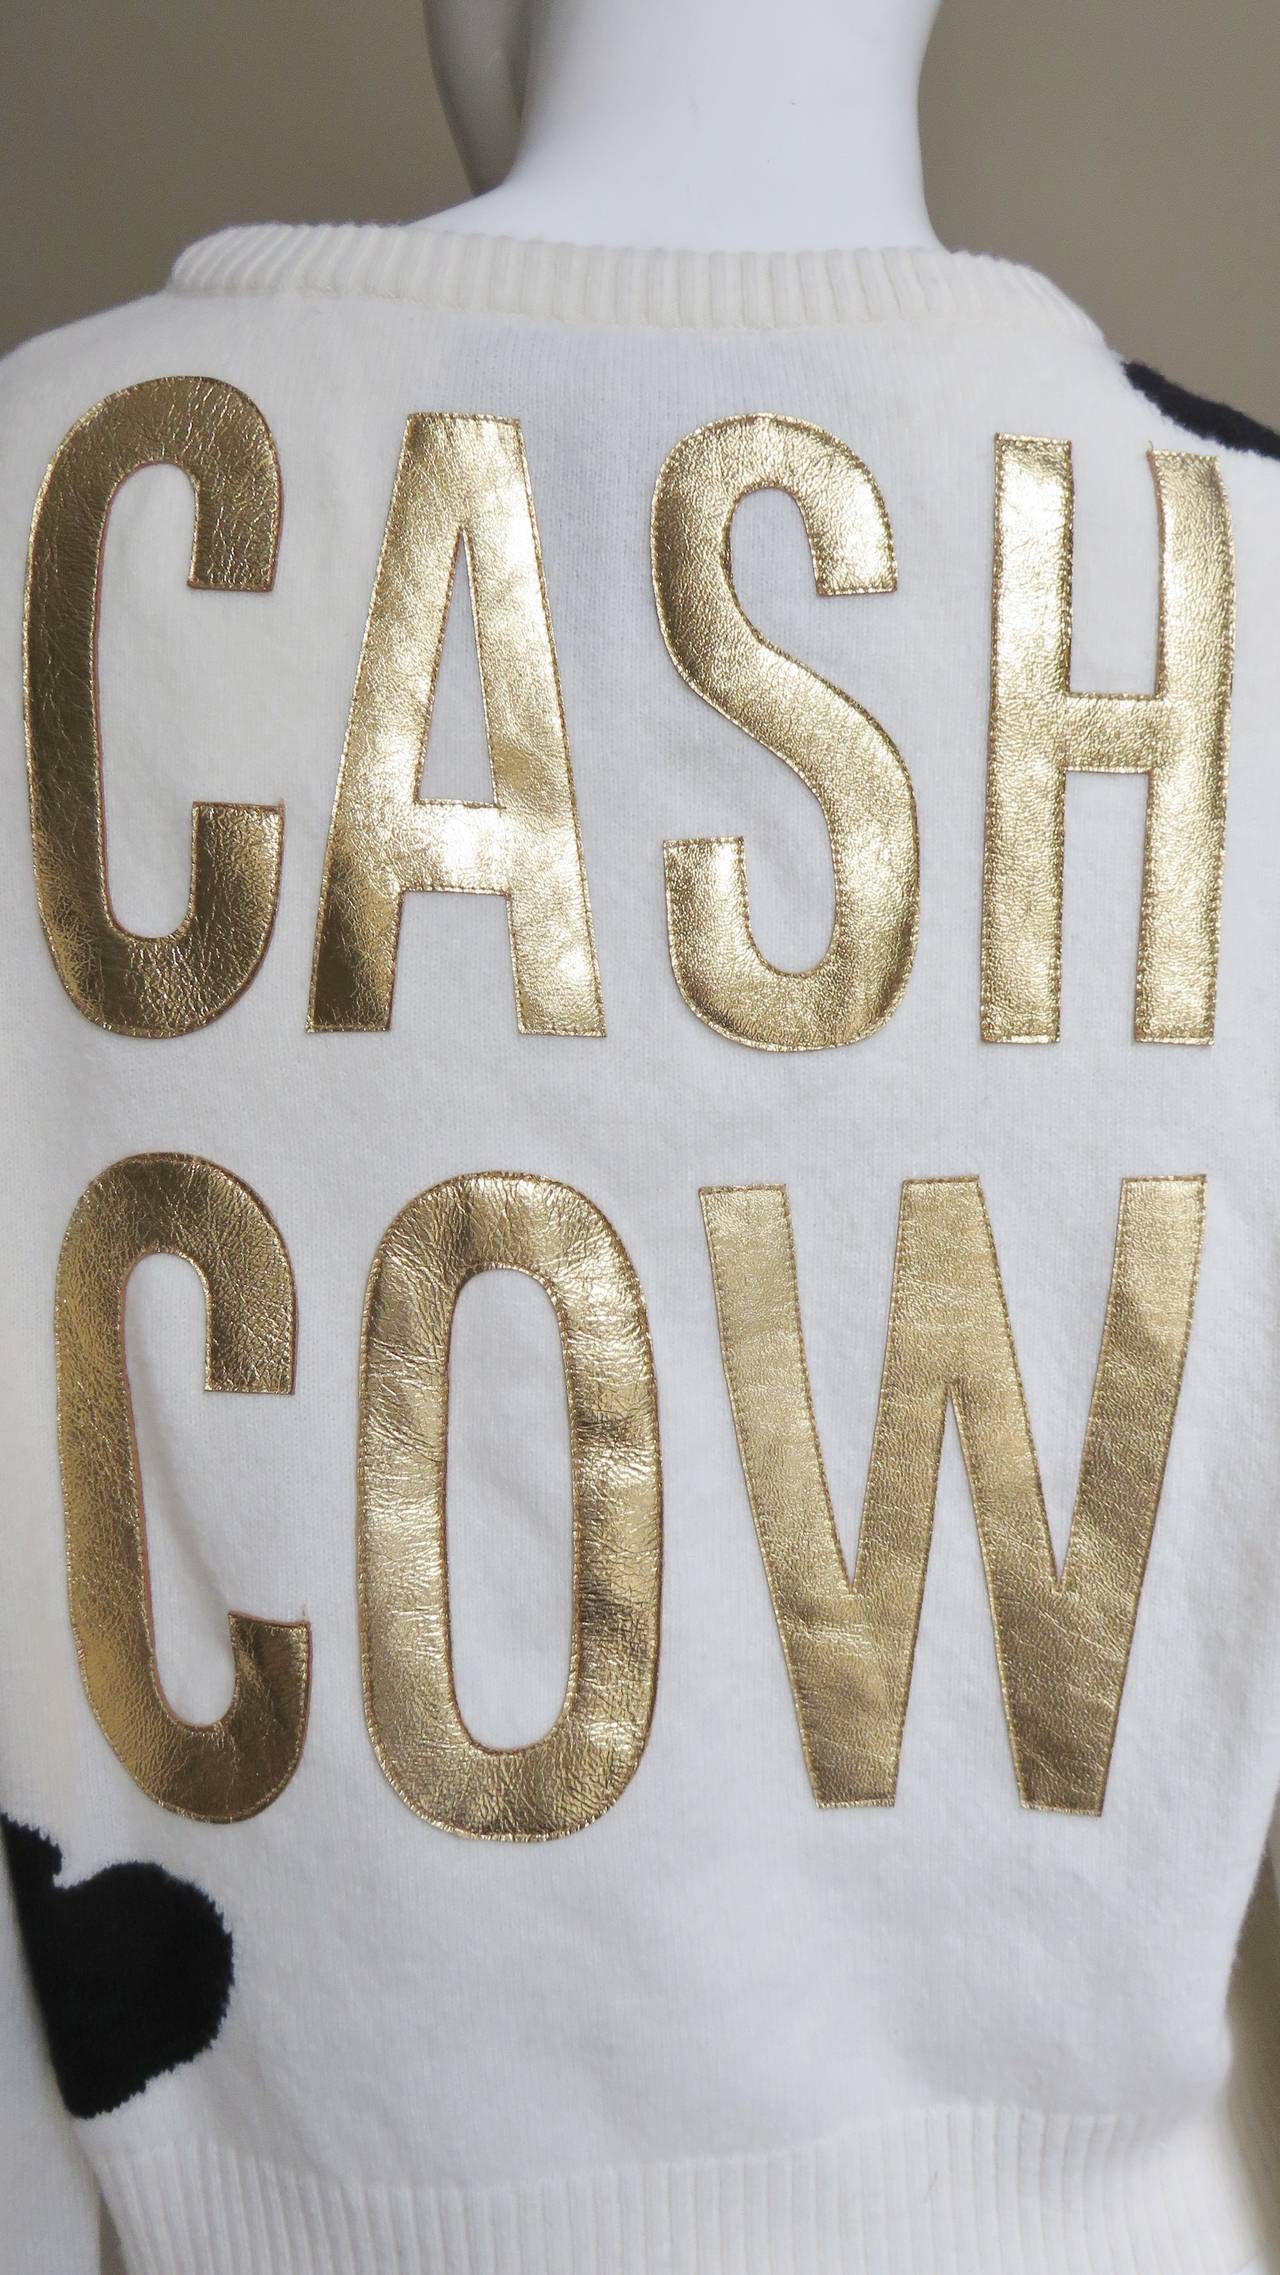 cash cow clothing